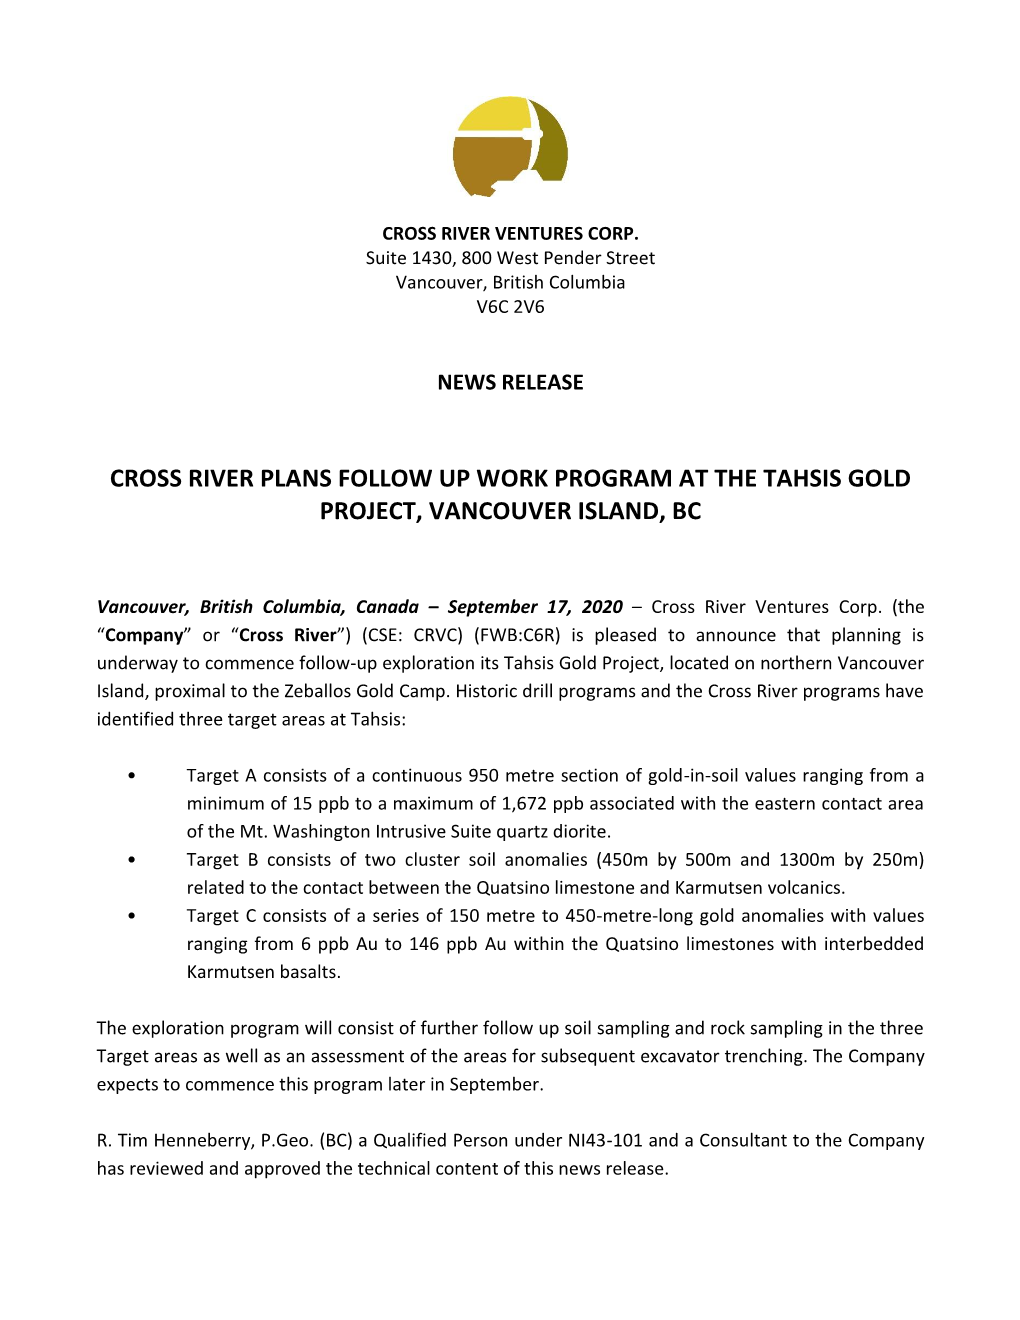 Cross River Plans Follow up Work Program at the Tahsis Gold Project, Vancouver Island, Bc